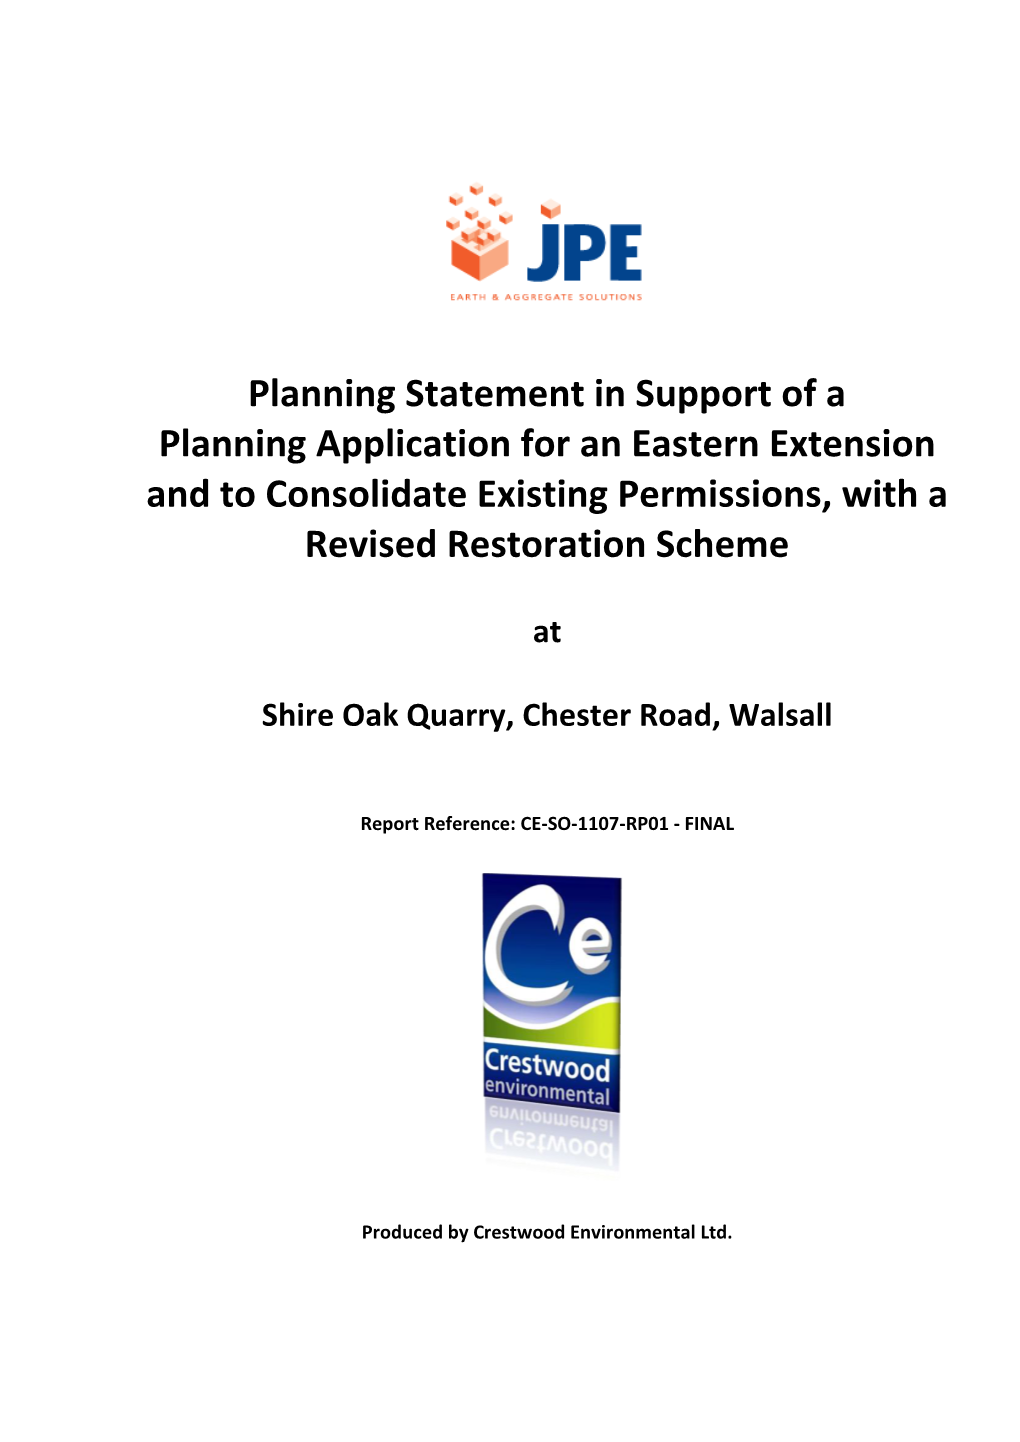 Planning Statement in Support of a Planning Application for an Eastern Extension and to Consolidate Existing Permissions, with a Revised Restoration Scheme